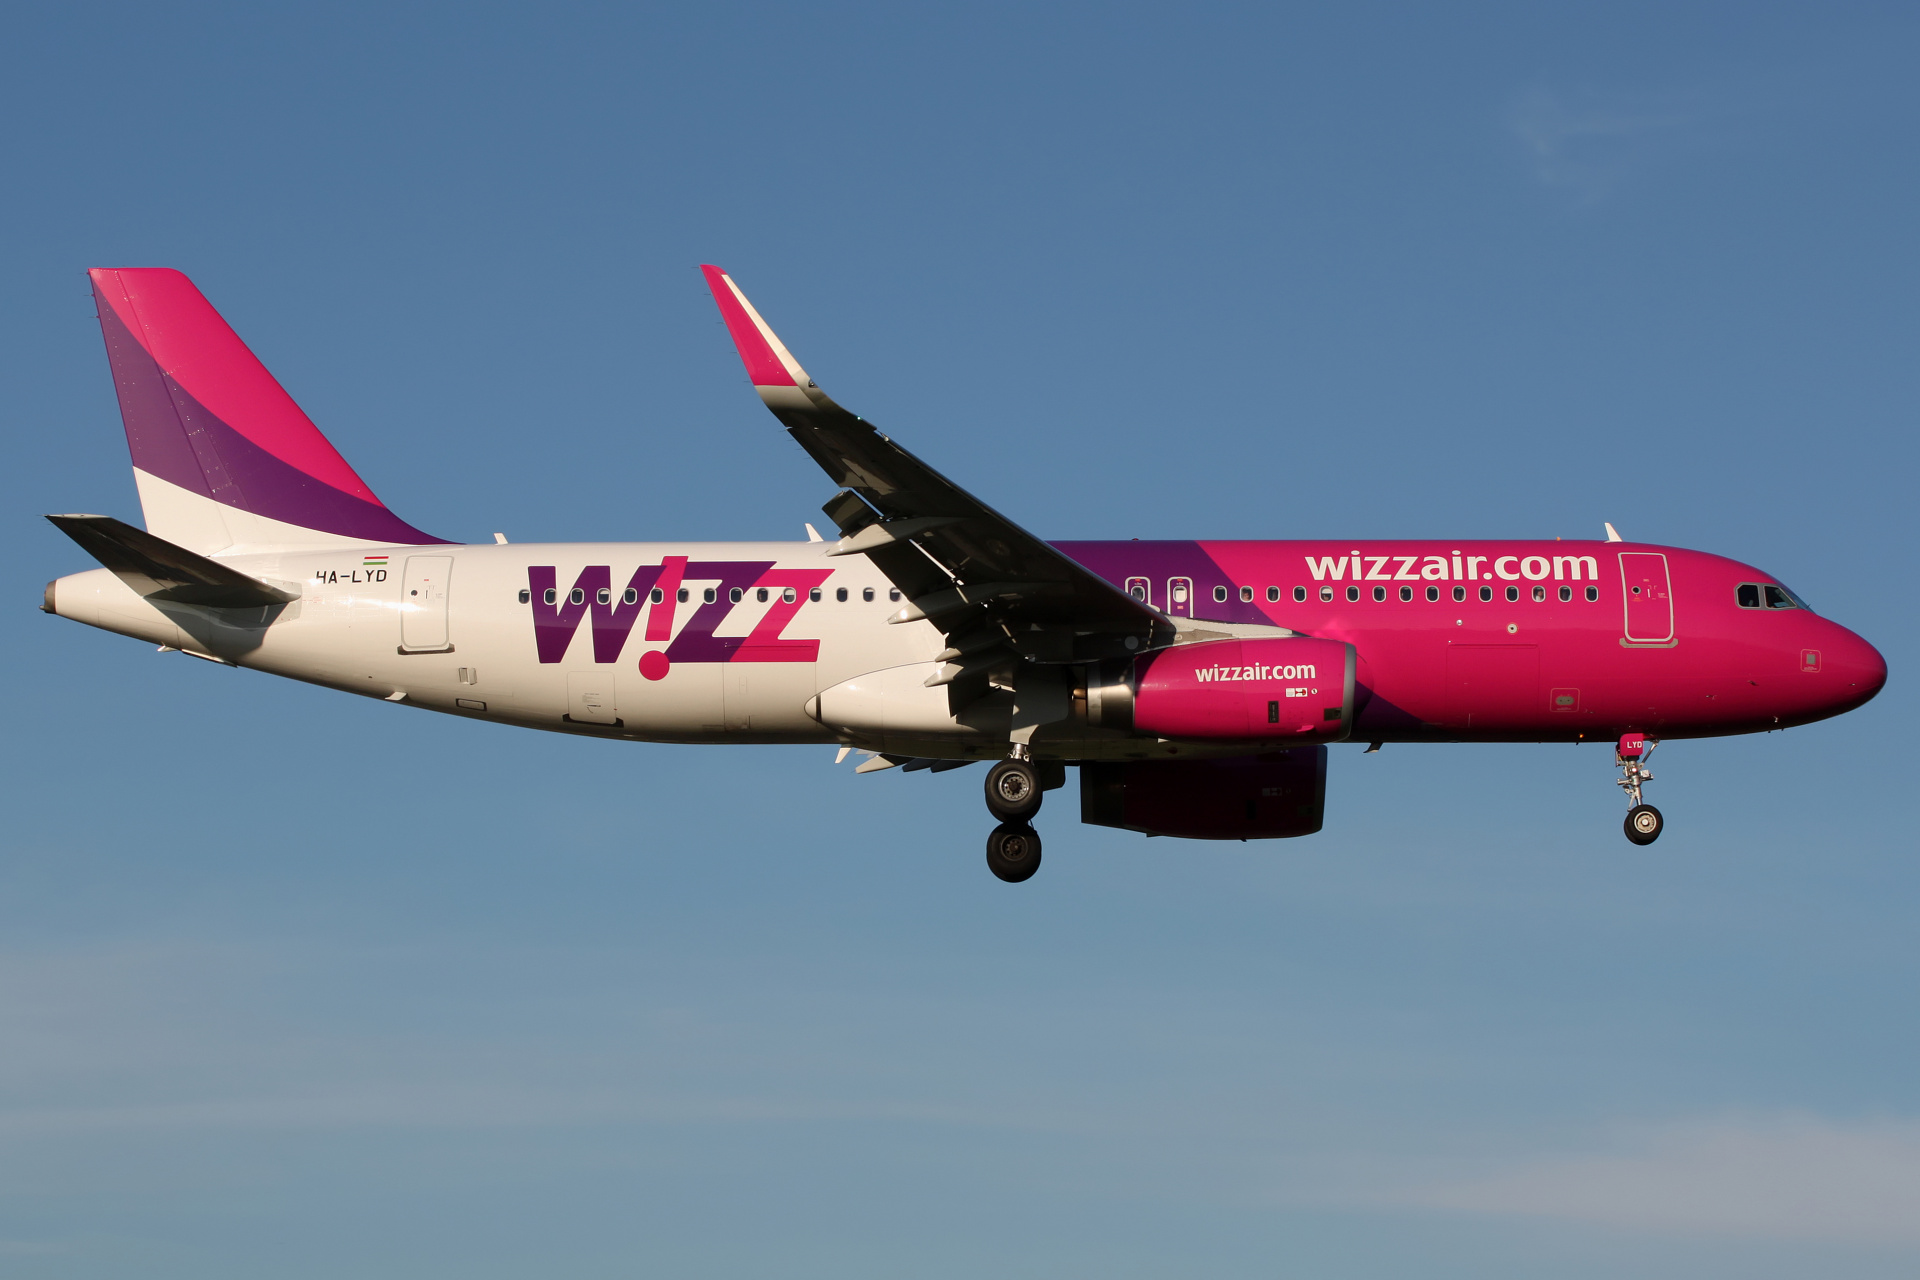 HA-LYD (Aircraft » EPWA Spotting » Airbus A320-200 » Wizz Air)